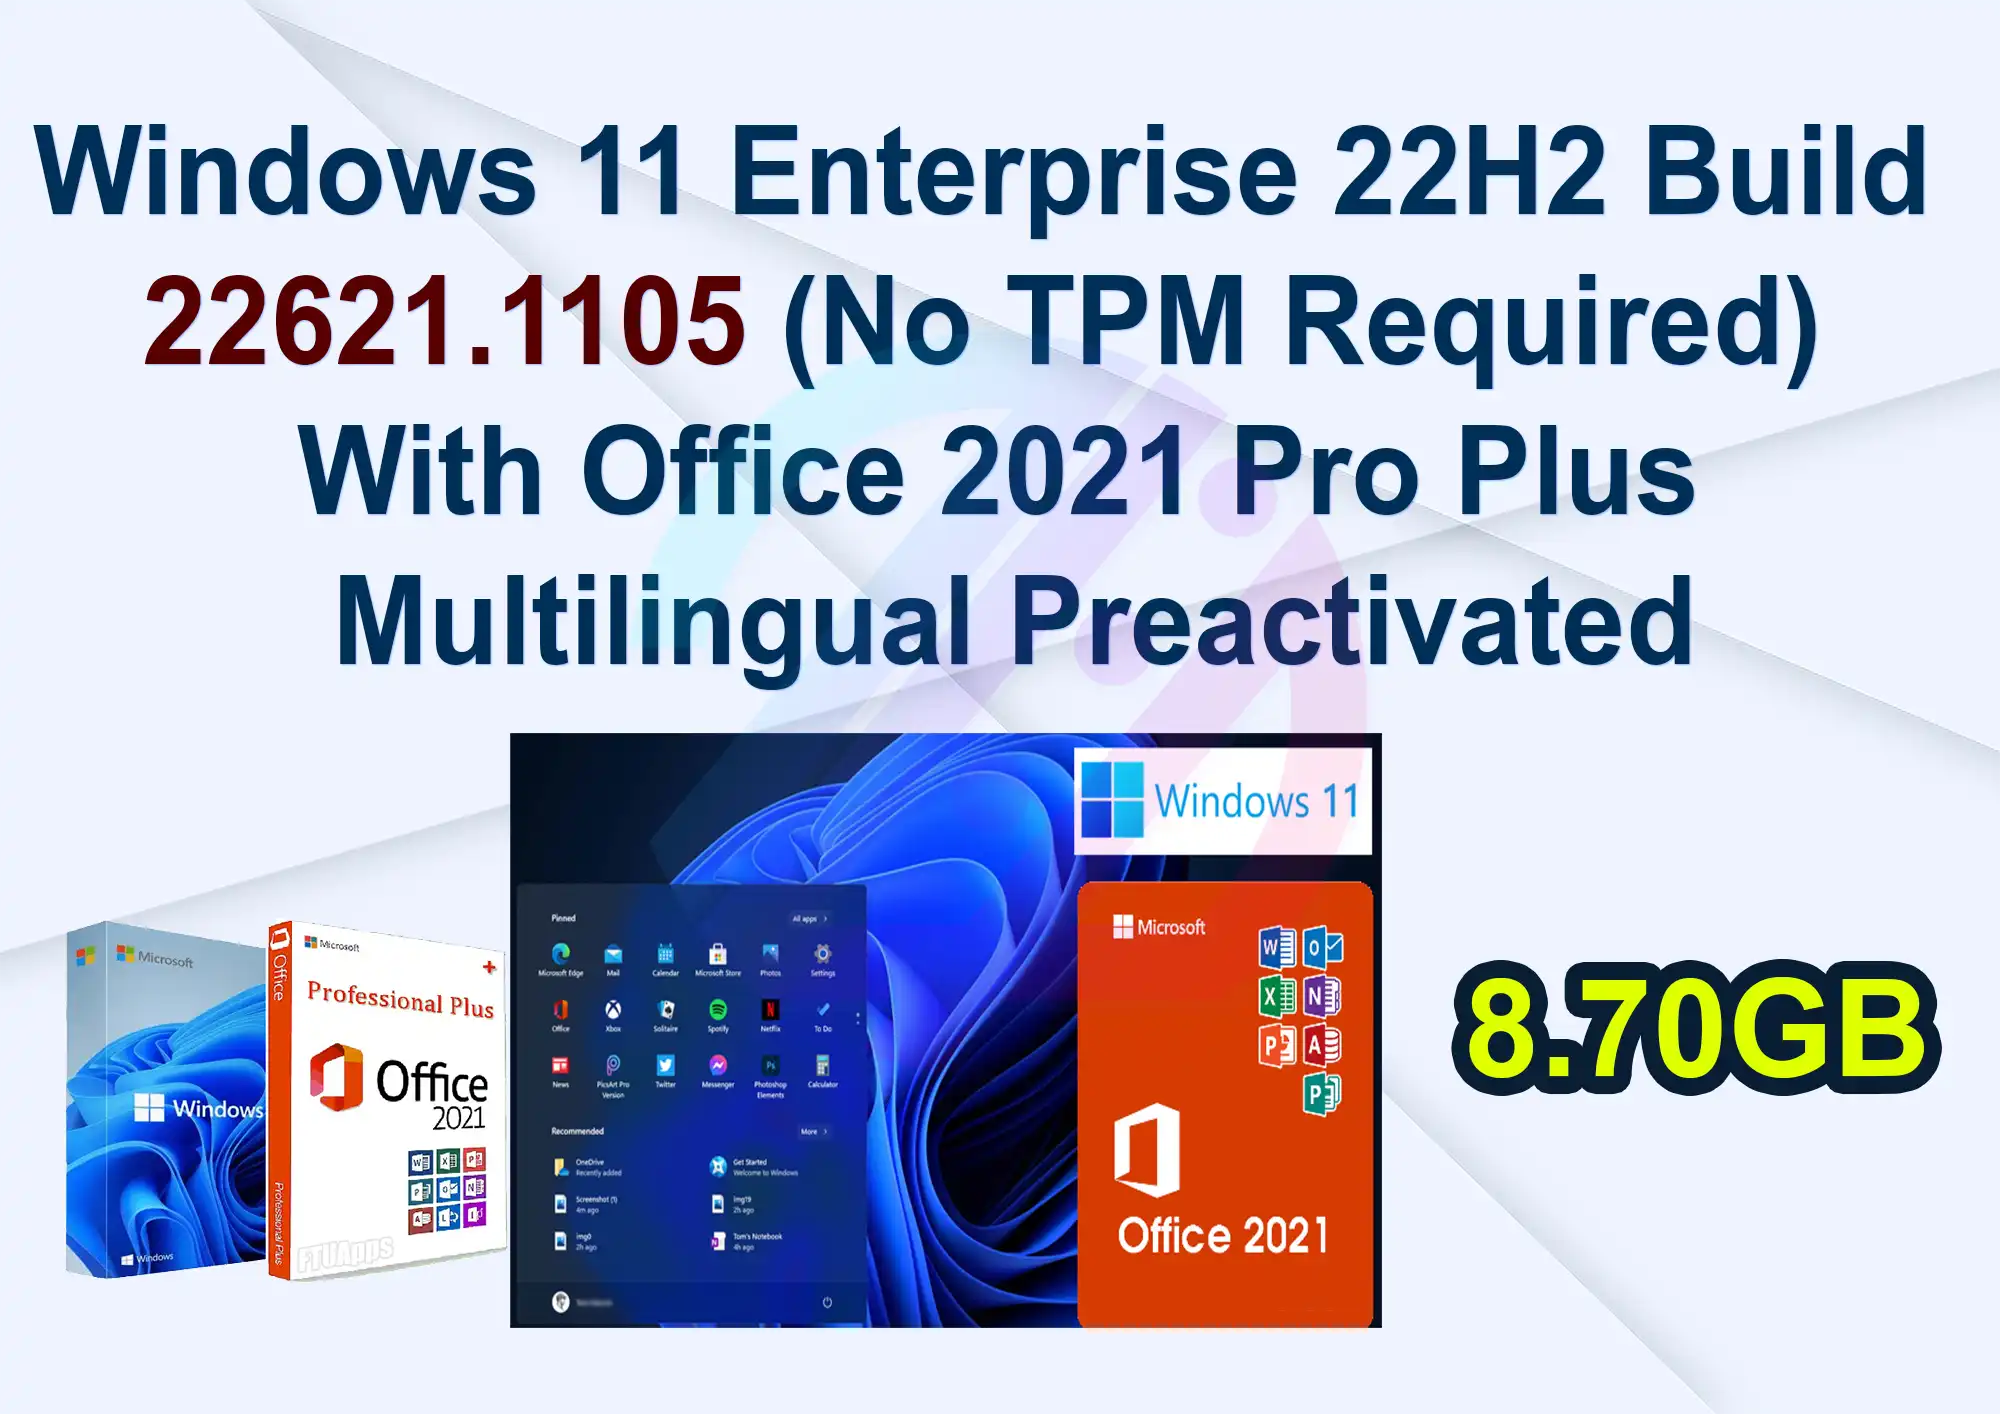 Windows 11 Enterprise 22H2 Build 22621.1105 (No TPM Required) With Office 2021 Pro Plus Multilingual Preactivated